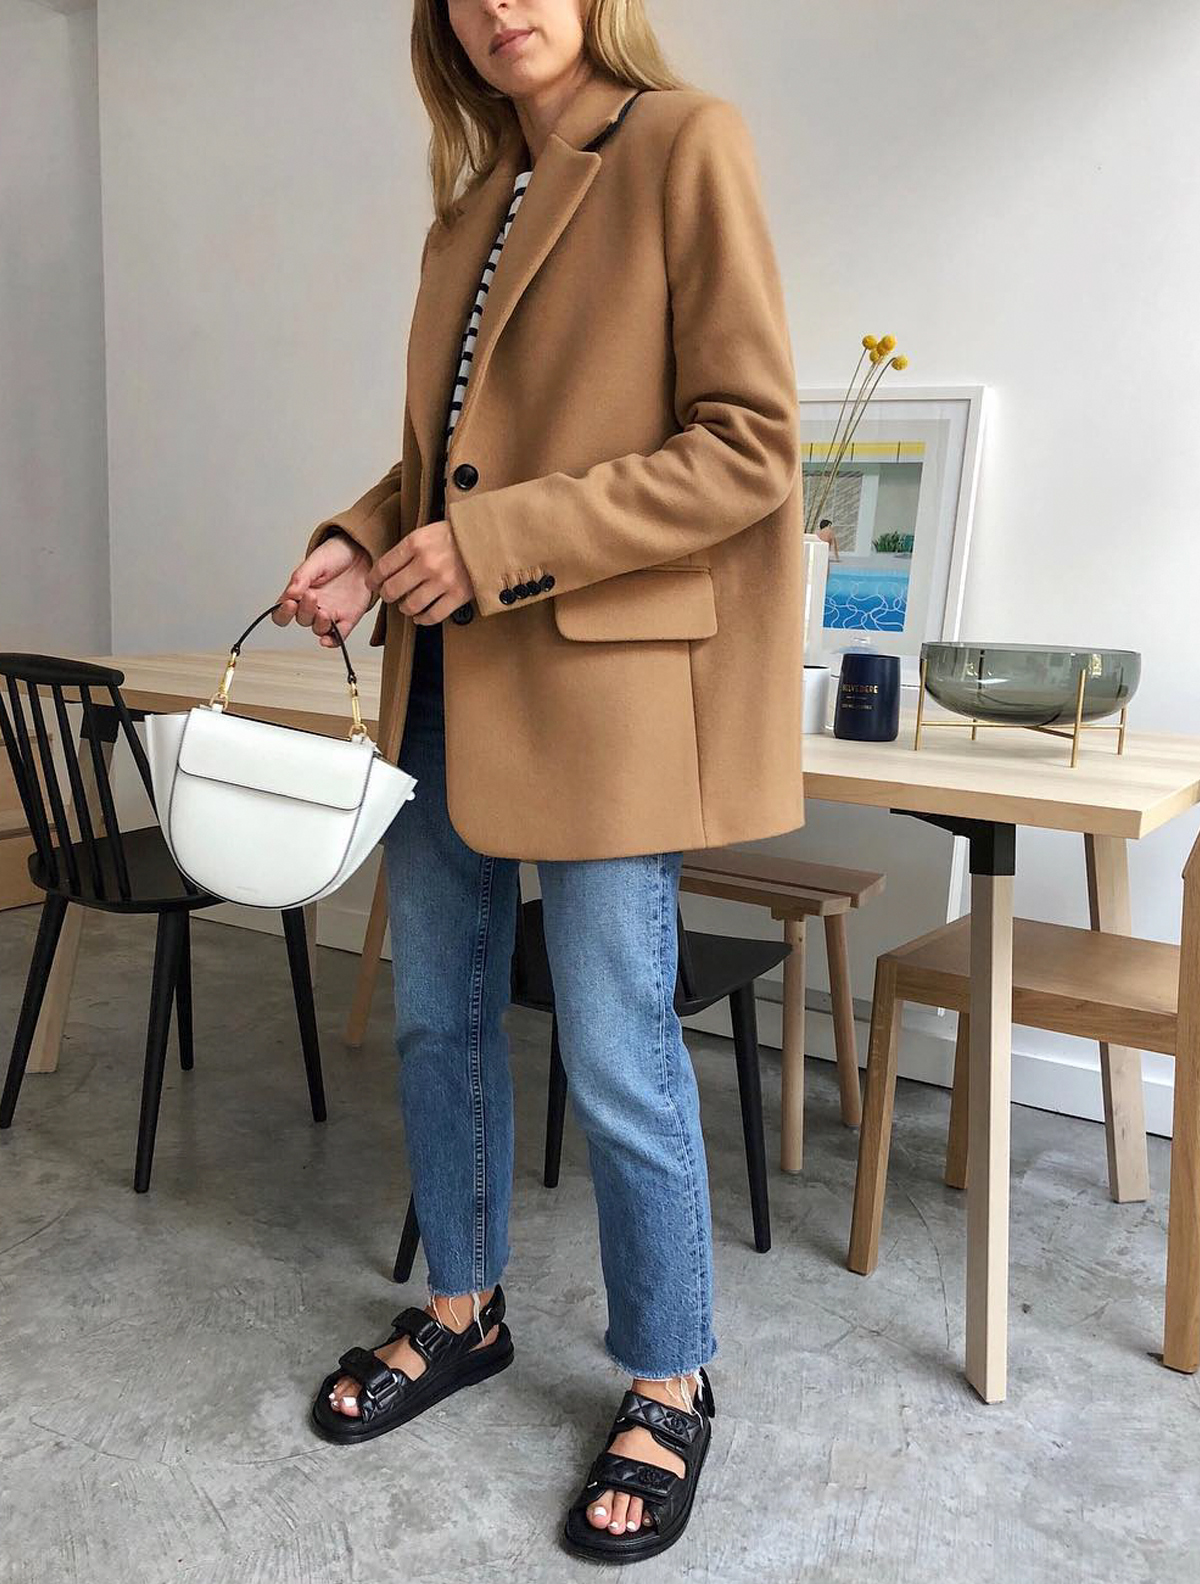 & Other Stories Wool Blazer: Brittany Bathgate wears the blazer with a pair of jeans and chunky leather sandals